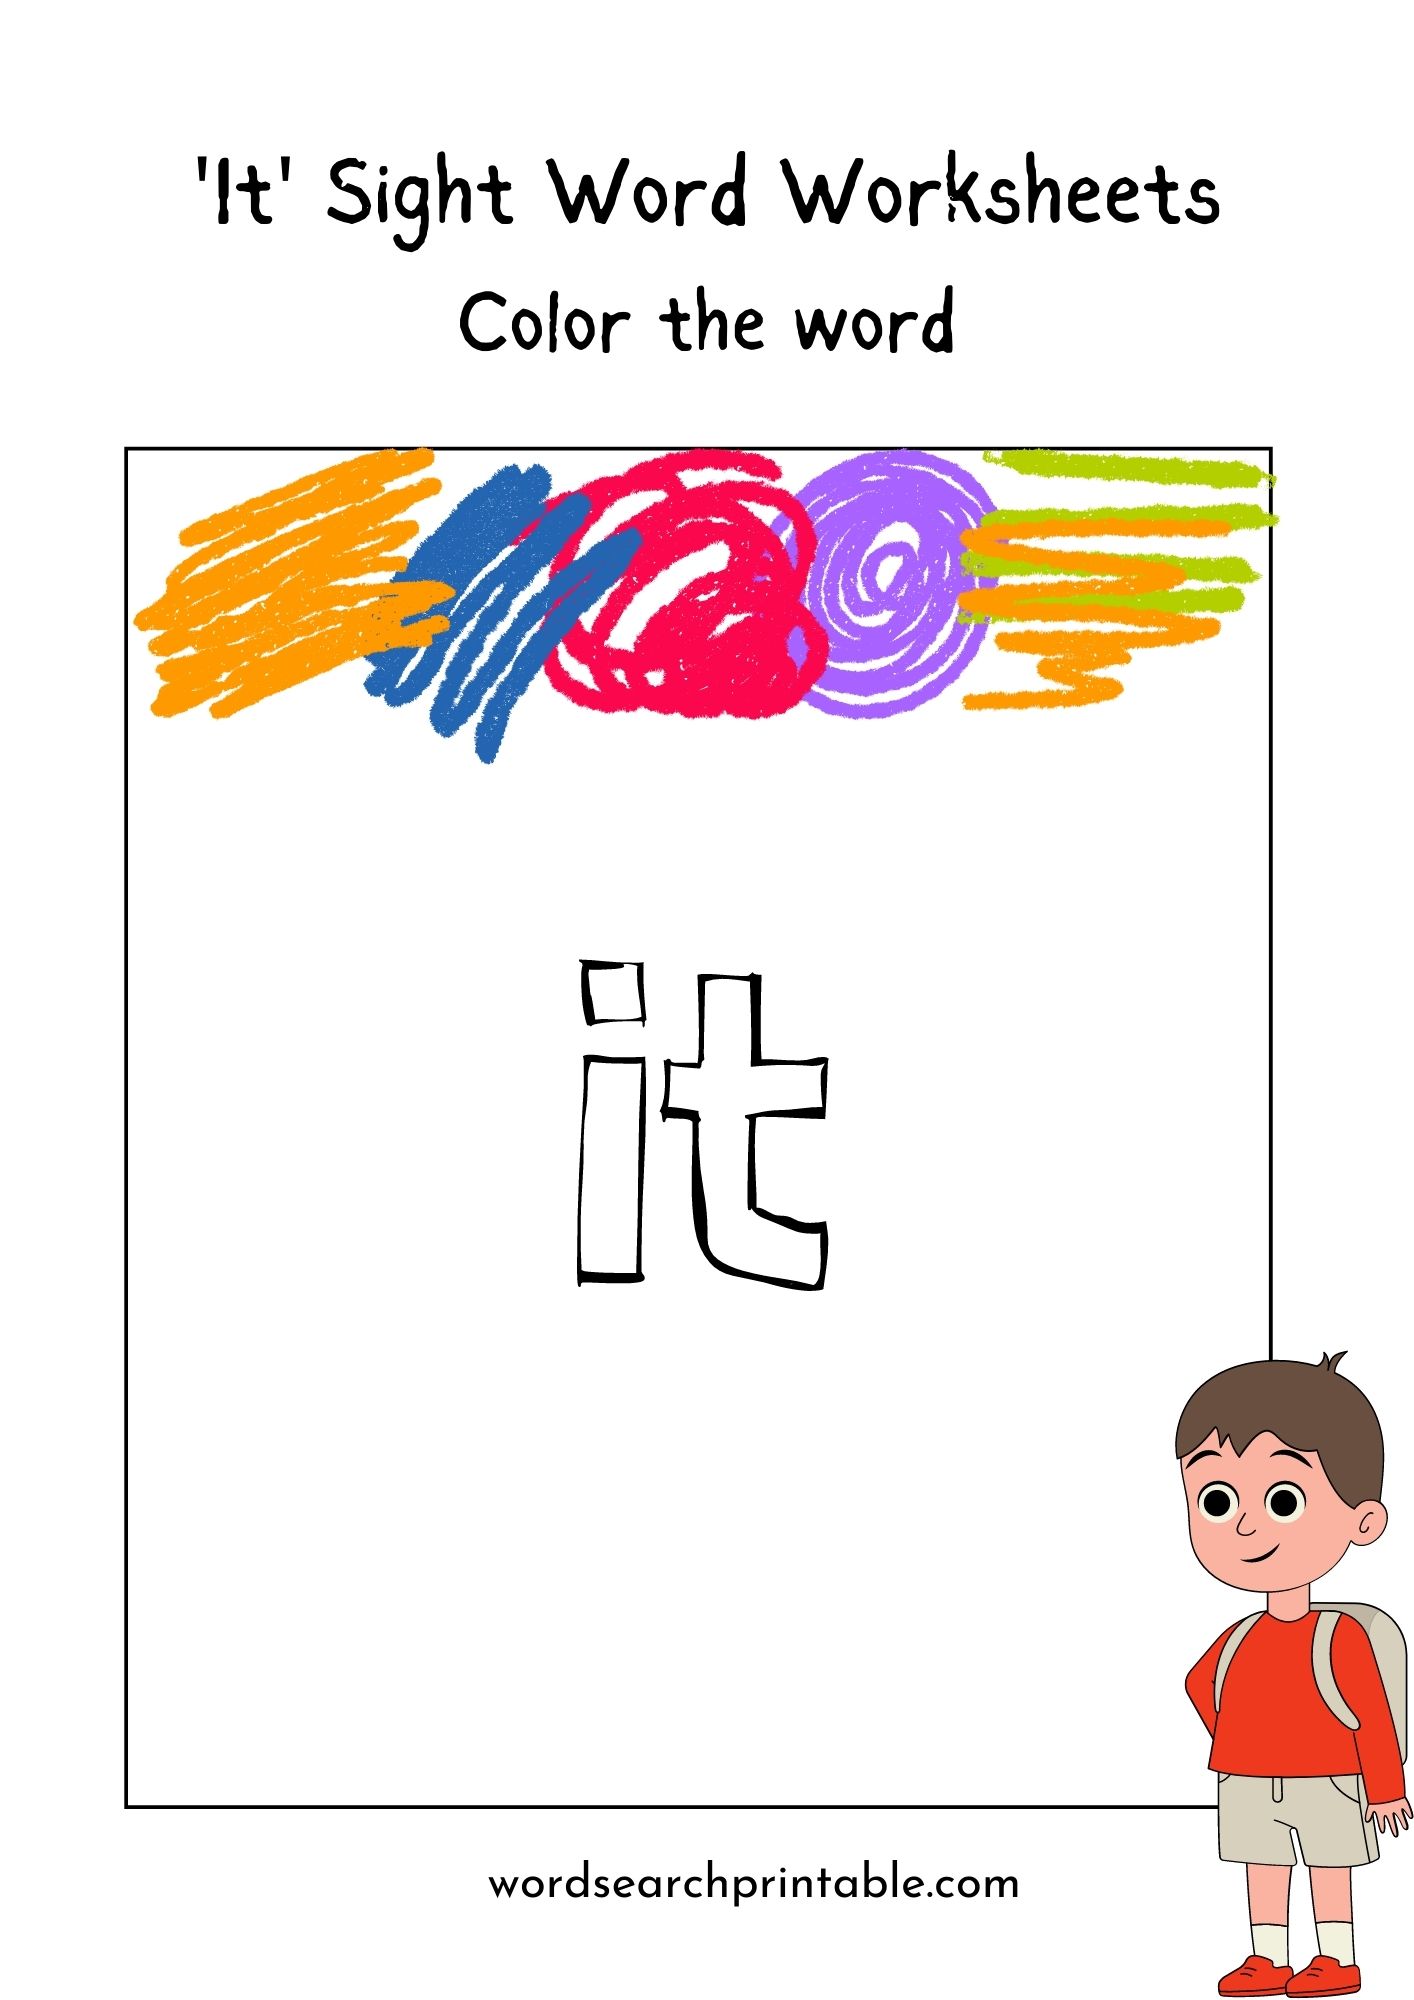 Color the sight word “It”